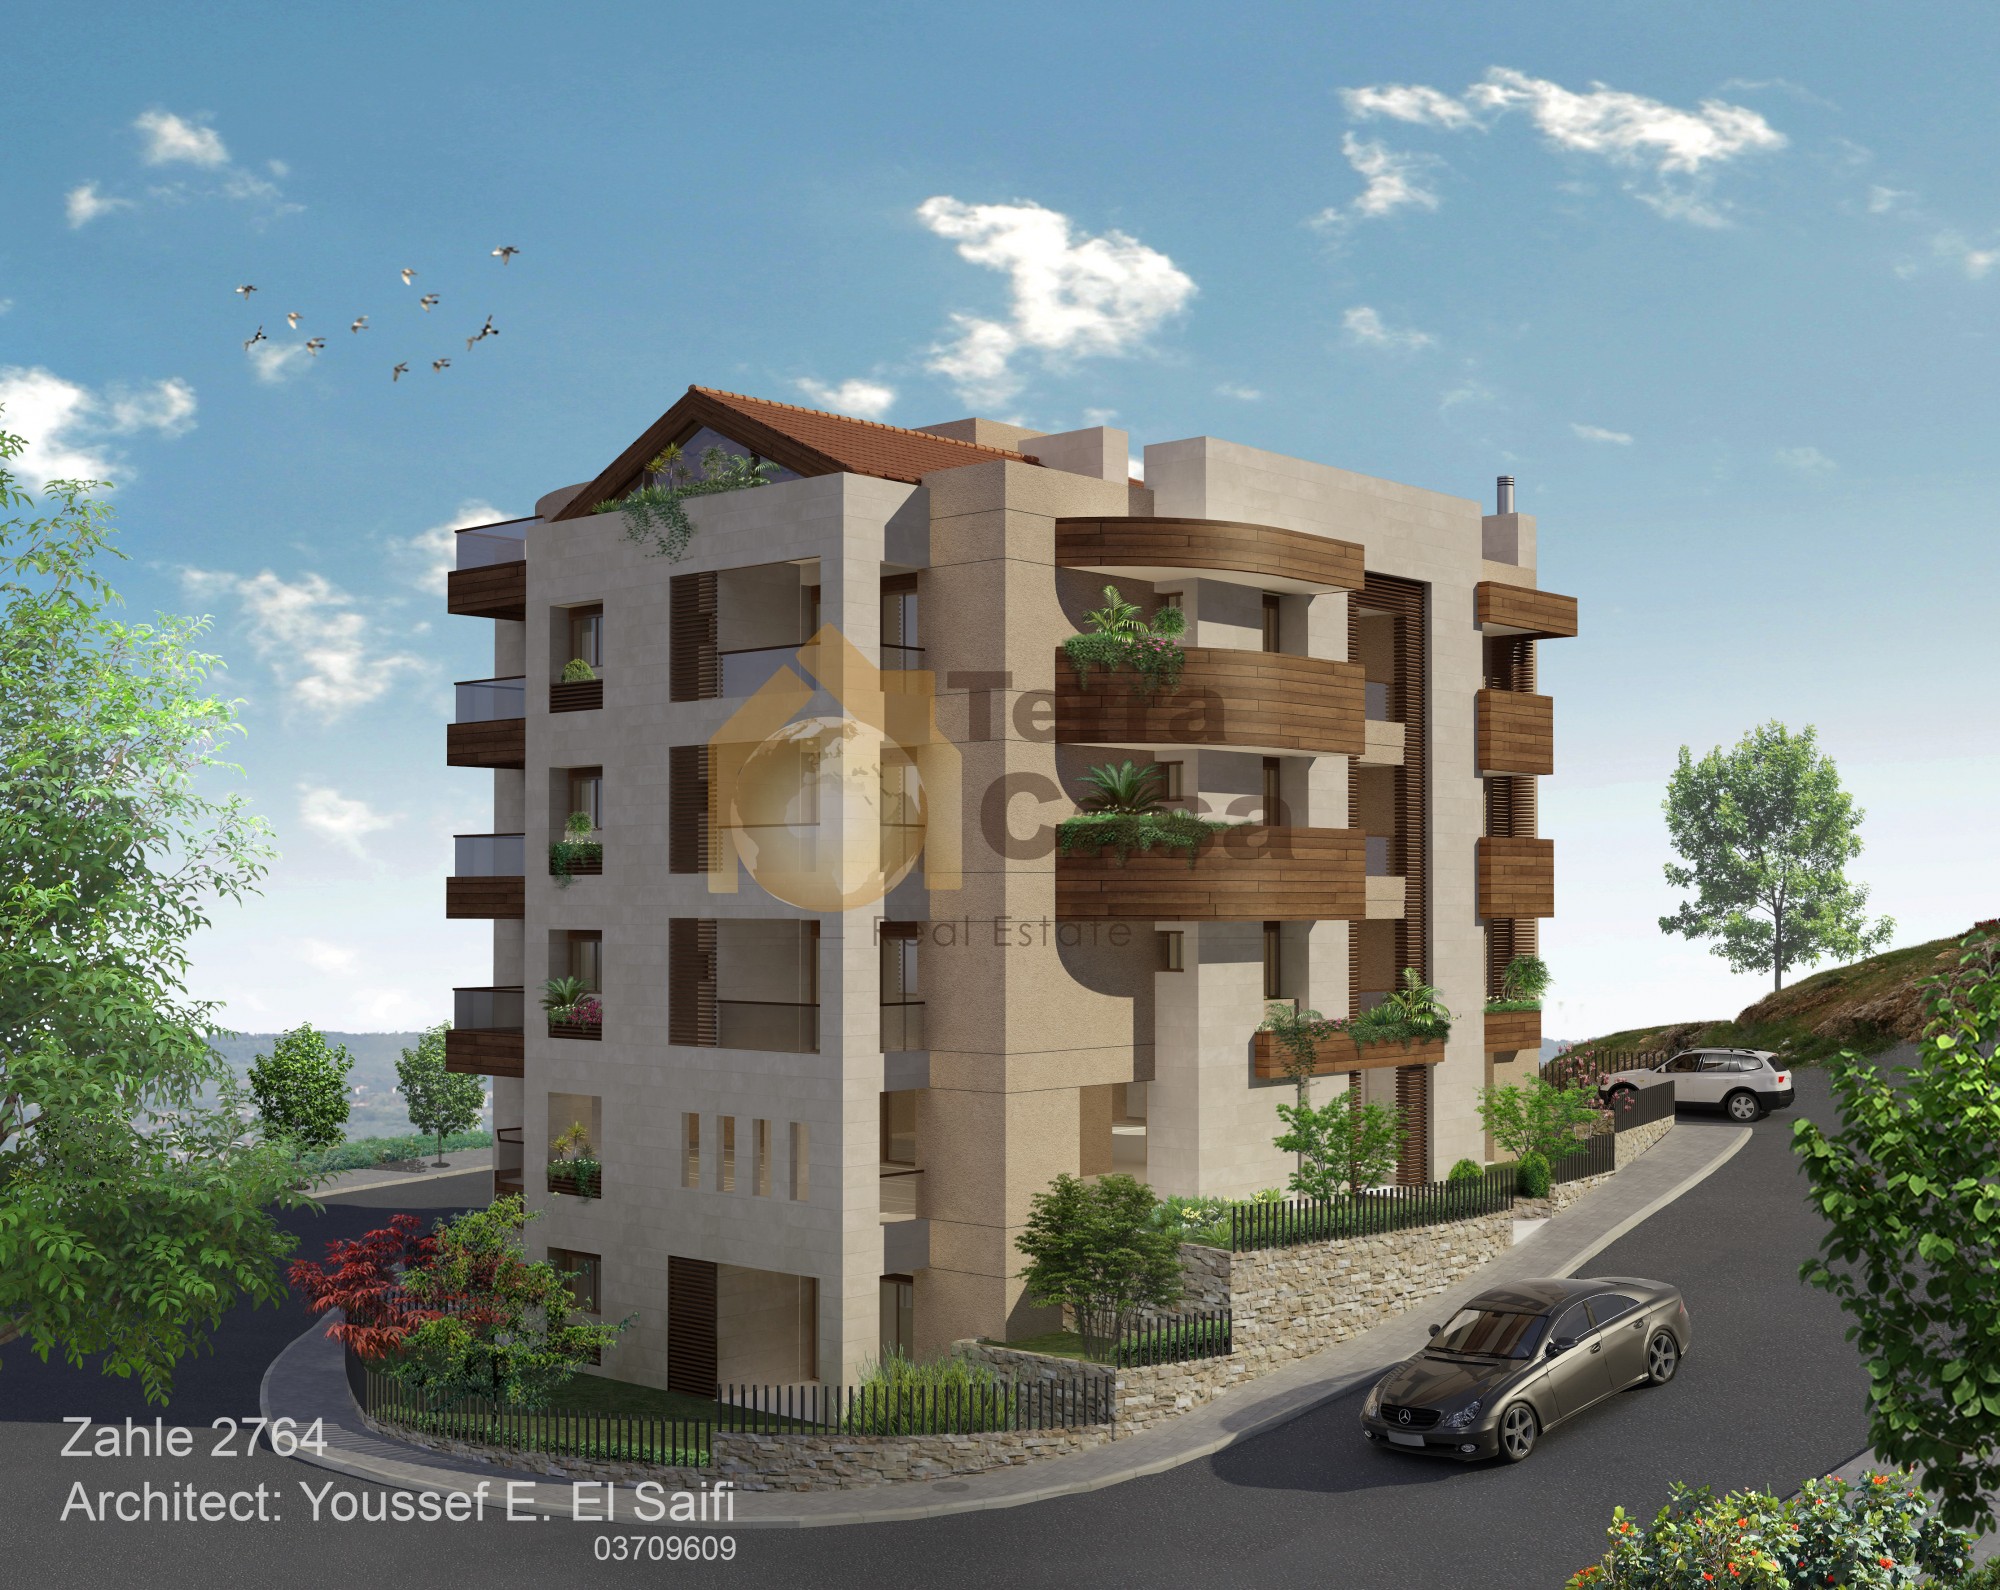 apartment for sale in zahle ksara brand new luxurious finishing Ref# 300